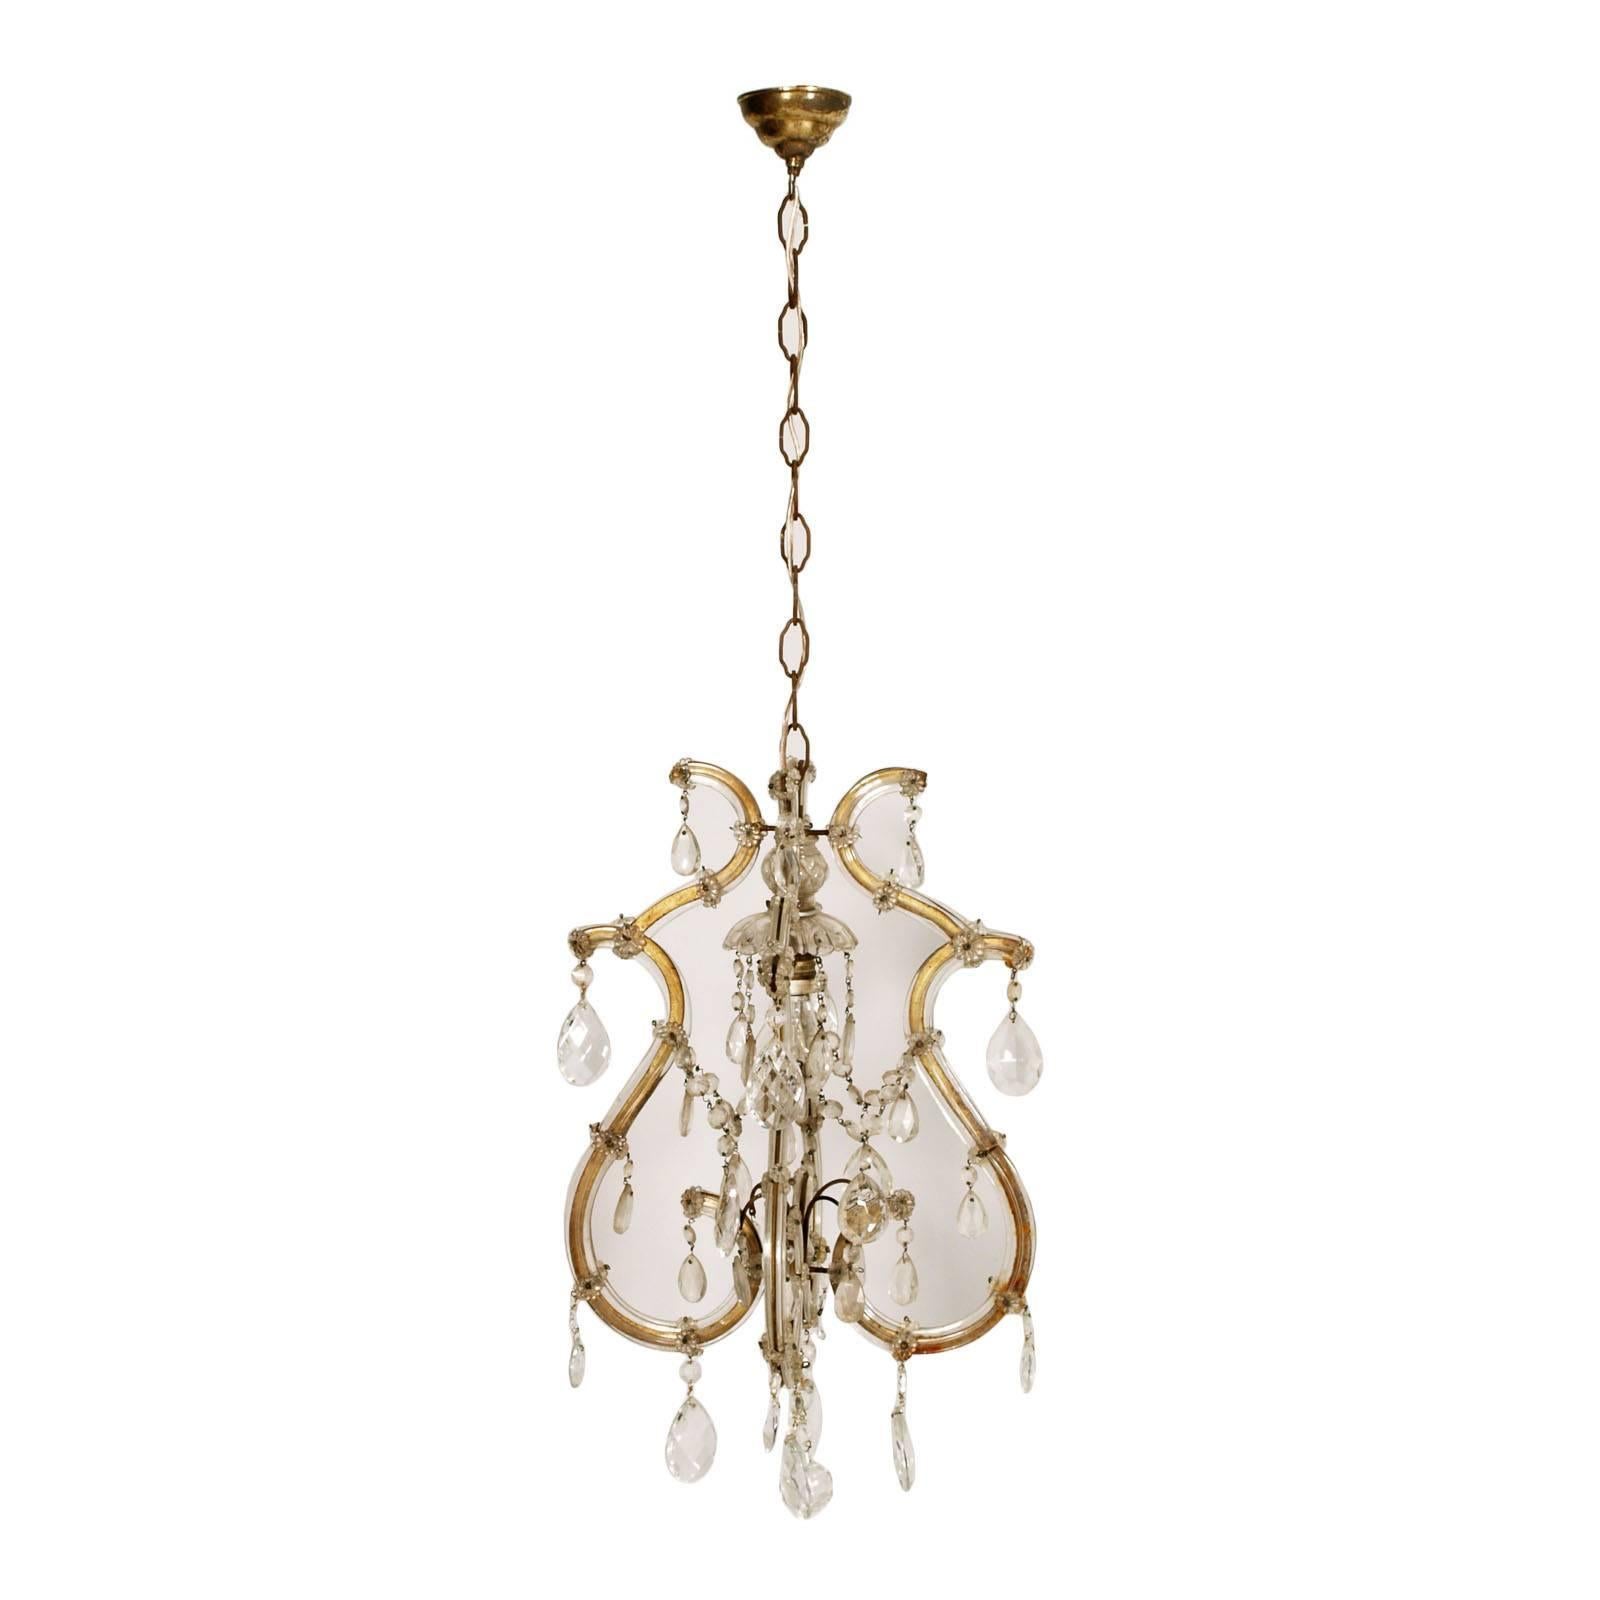 1910s Murano Maria Teresa Chandelier by Salviati with Restored Electrical System